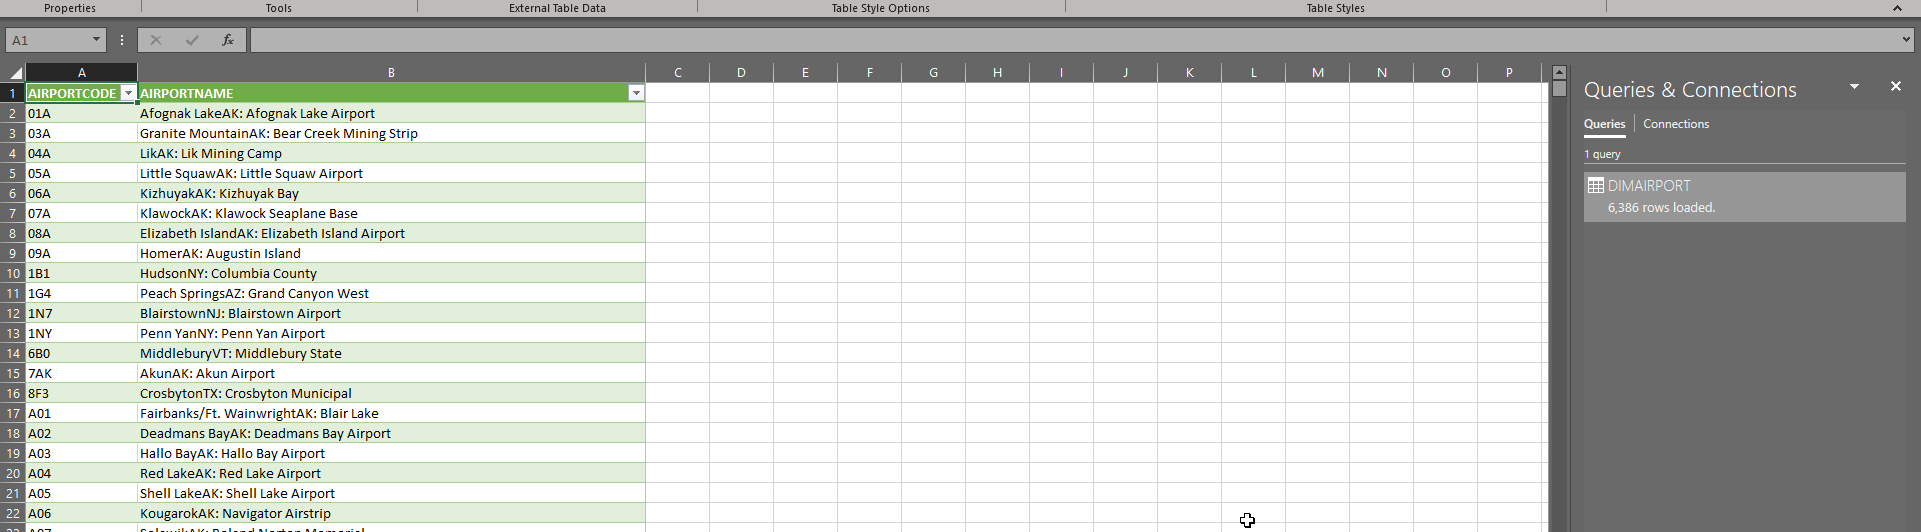 data layout in Excel